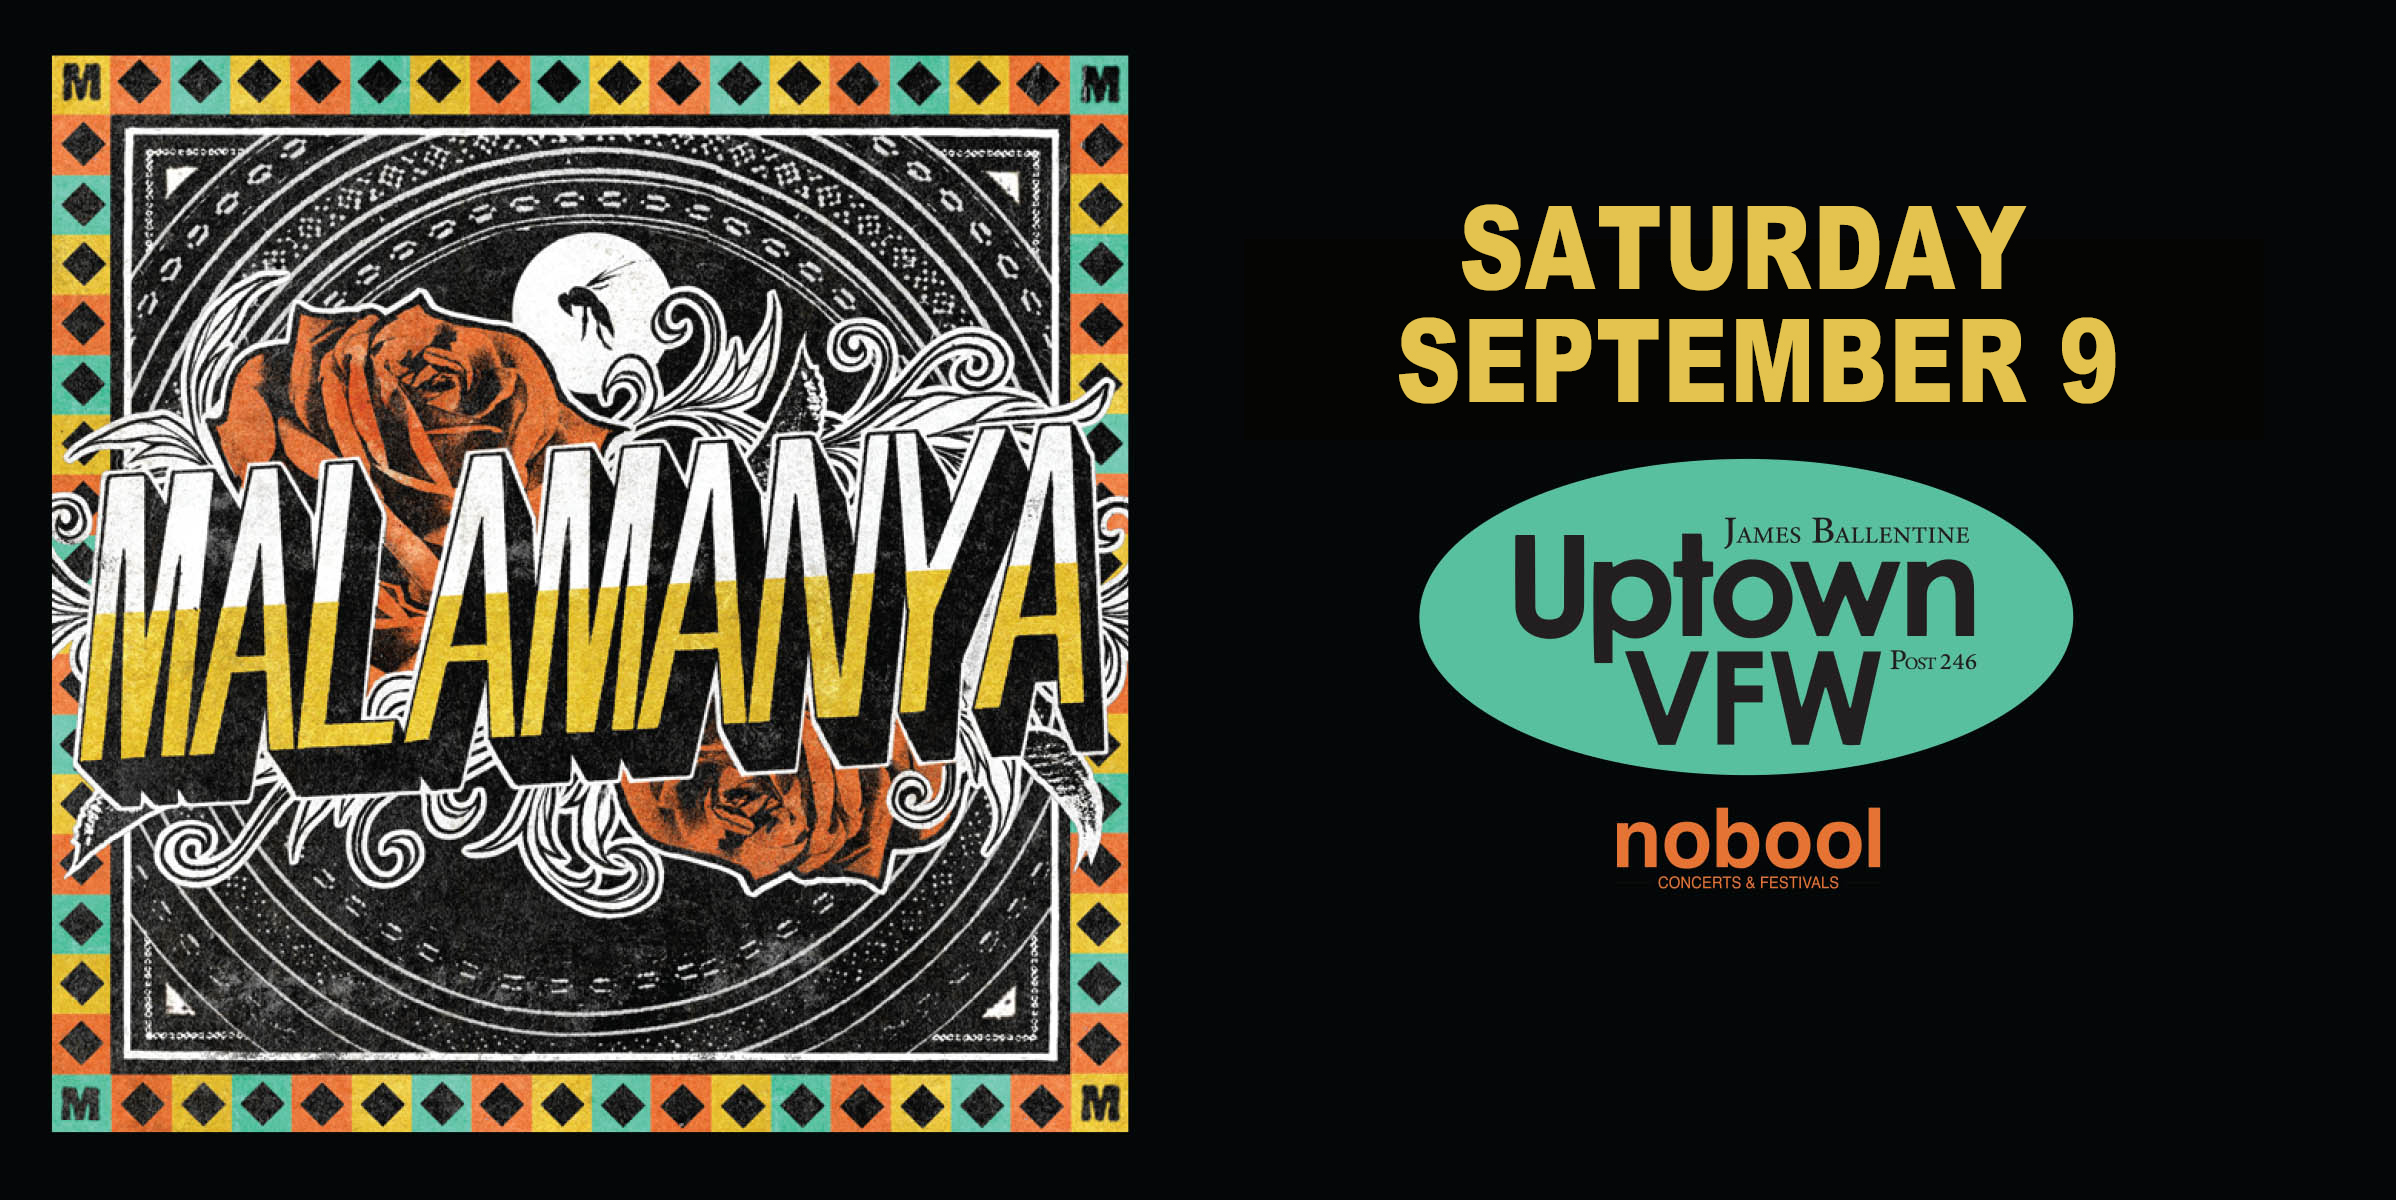 Malamanya Saturday, September 9 James Ballentine "Uptown" VFW Post 246 Doors 9:00pm :: Music 9:00pm :: 21+ GA $15 ADV / $20 DOS NO REFUNDS Tickets On-Sale Now